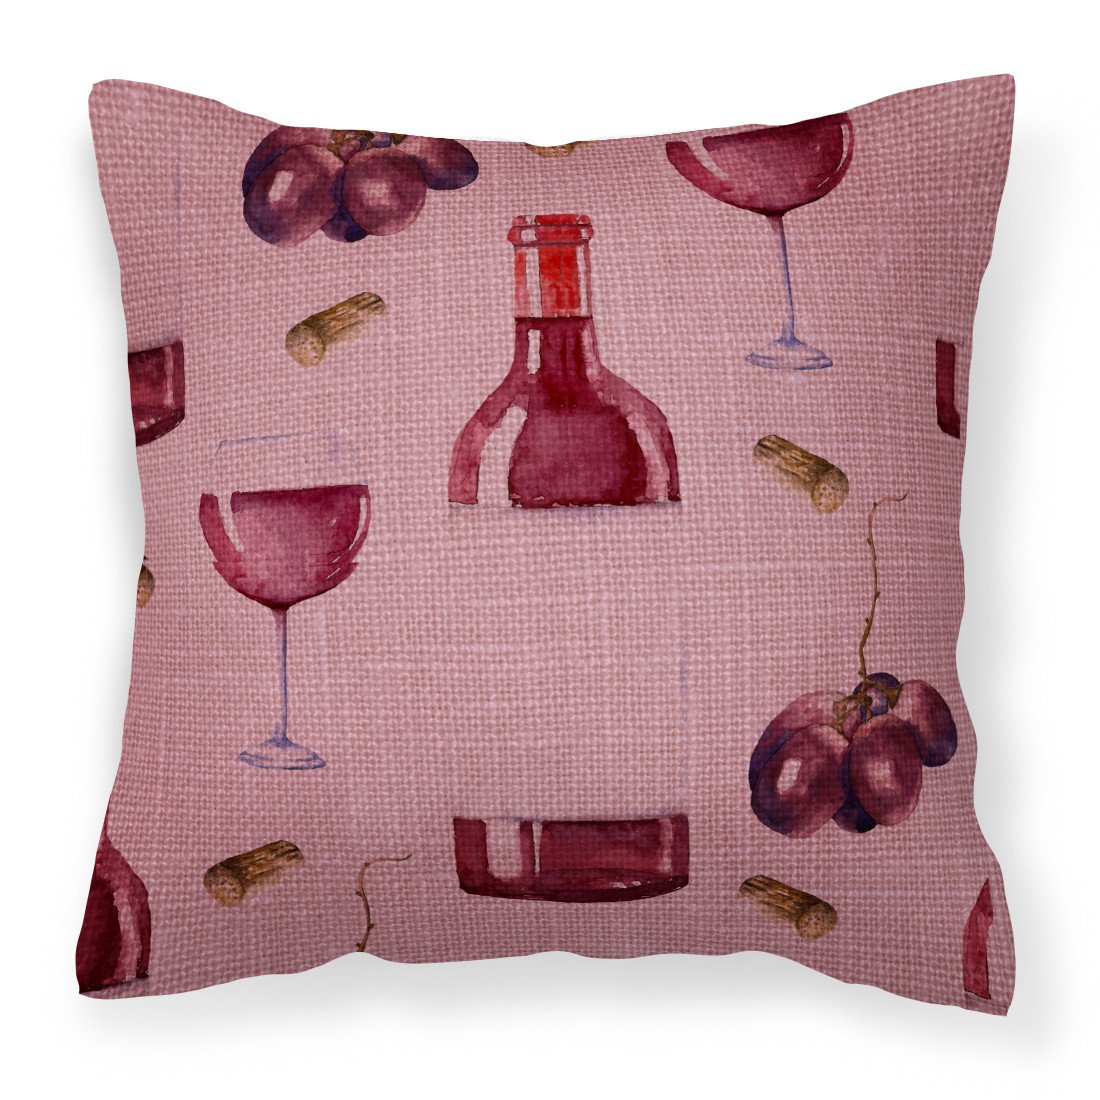 Red Wine on Linen Fabric Decorative Pillow BB5195PW1818 by Caroline's Treasures